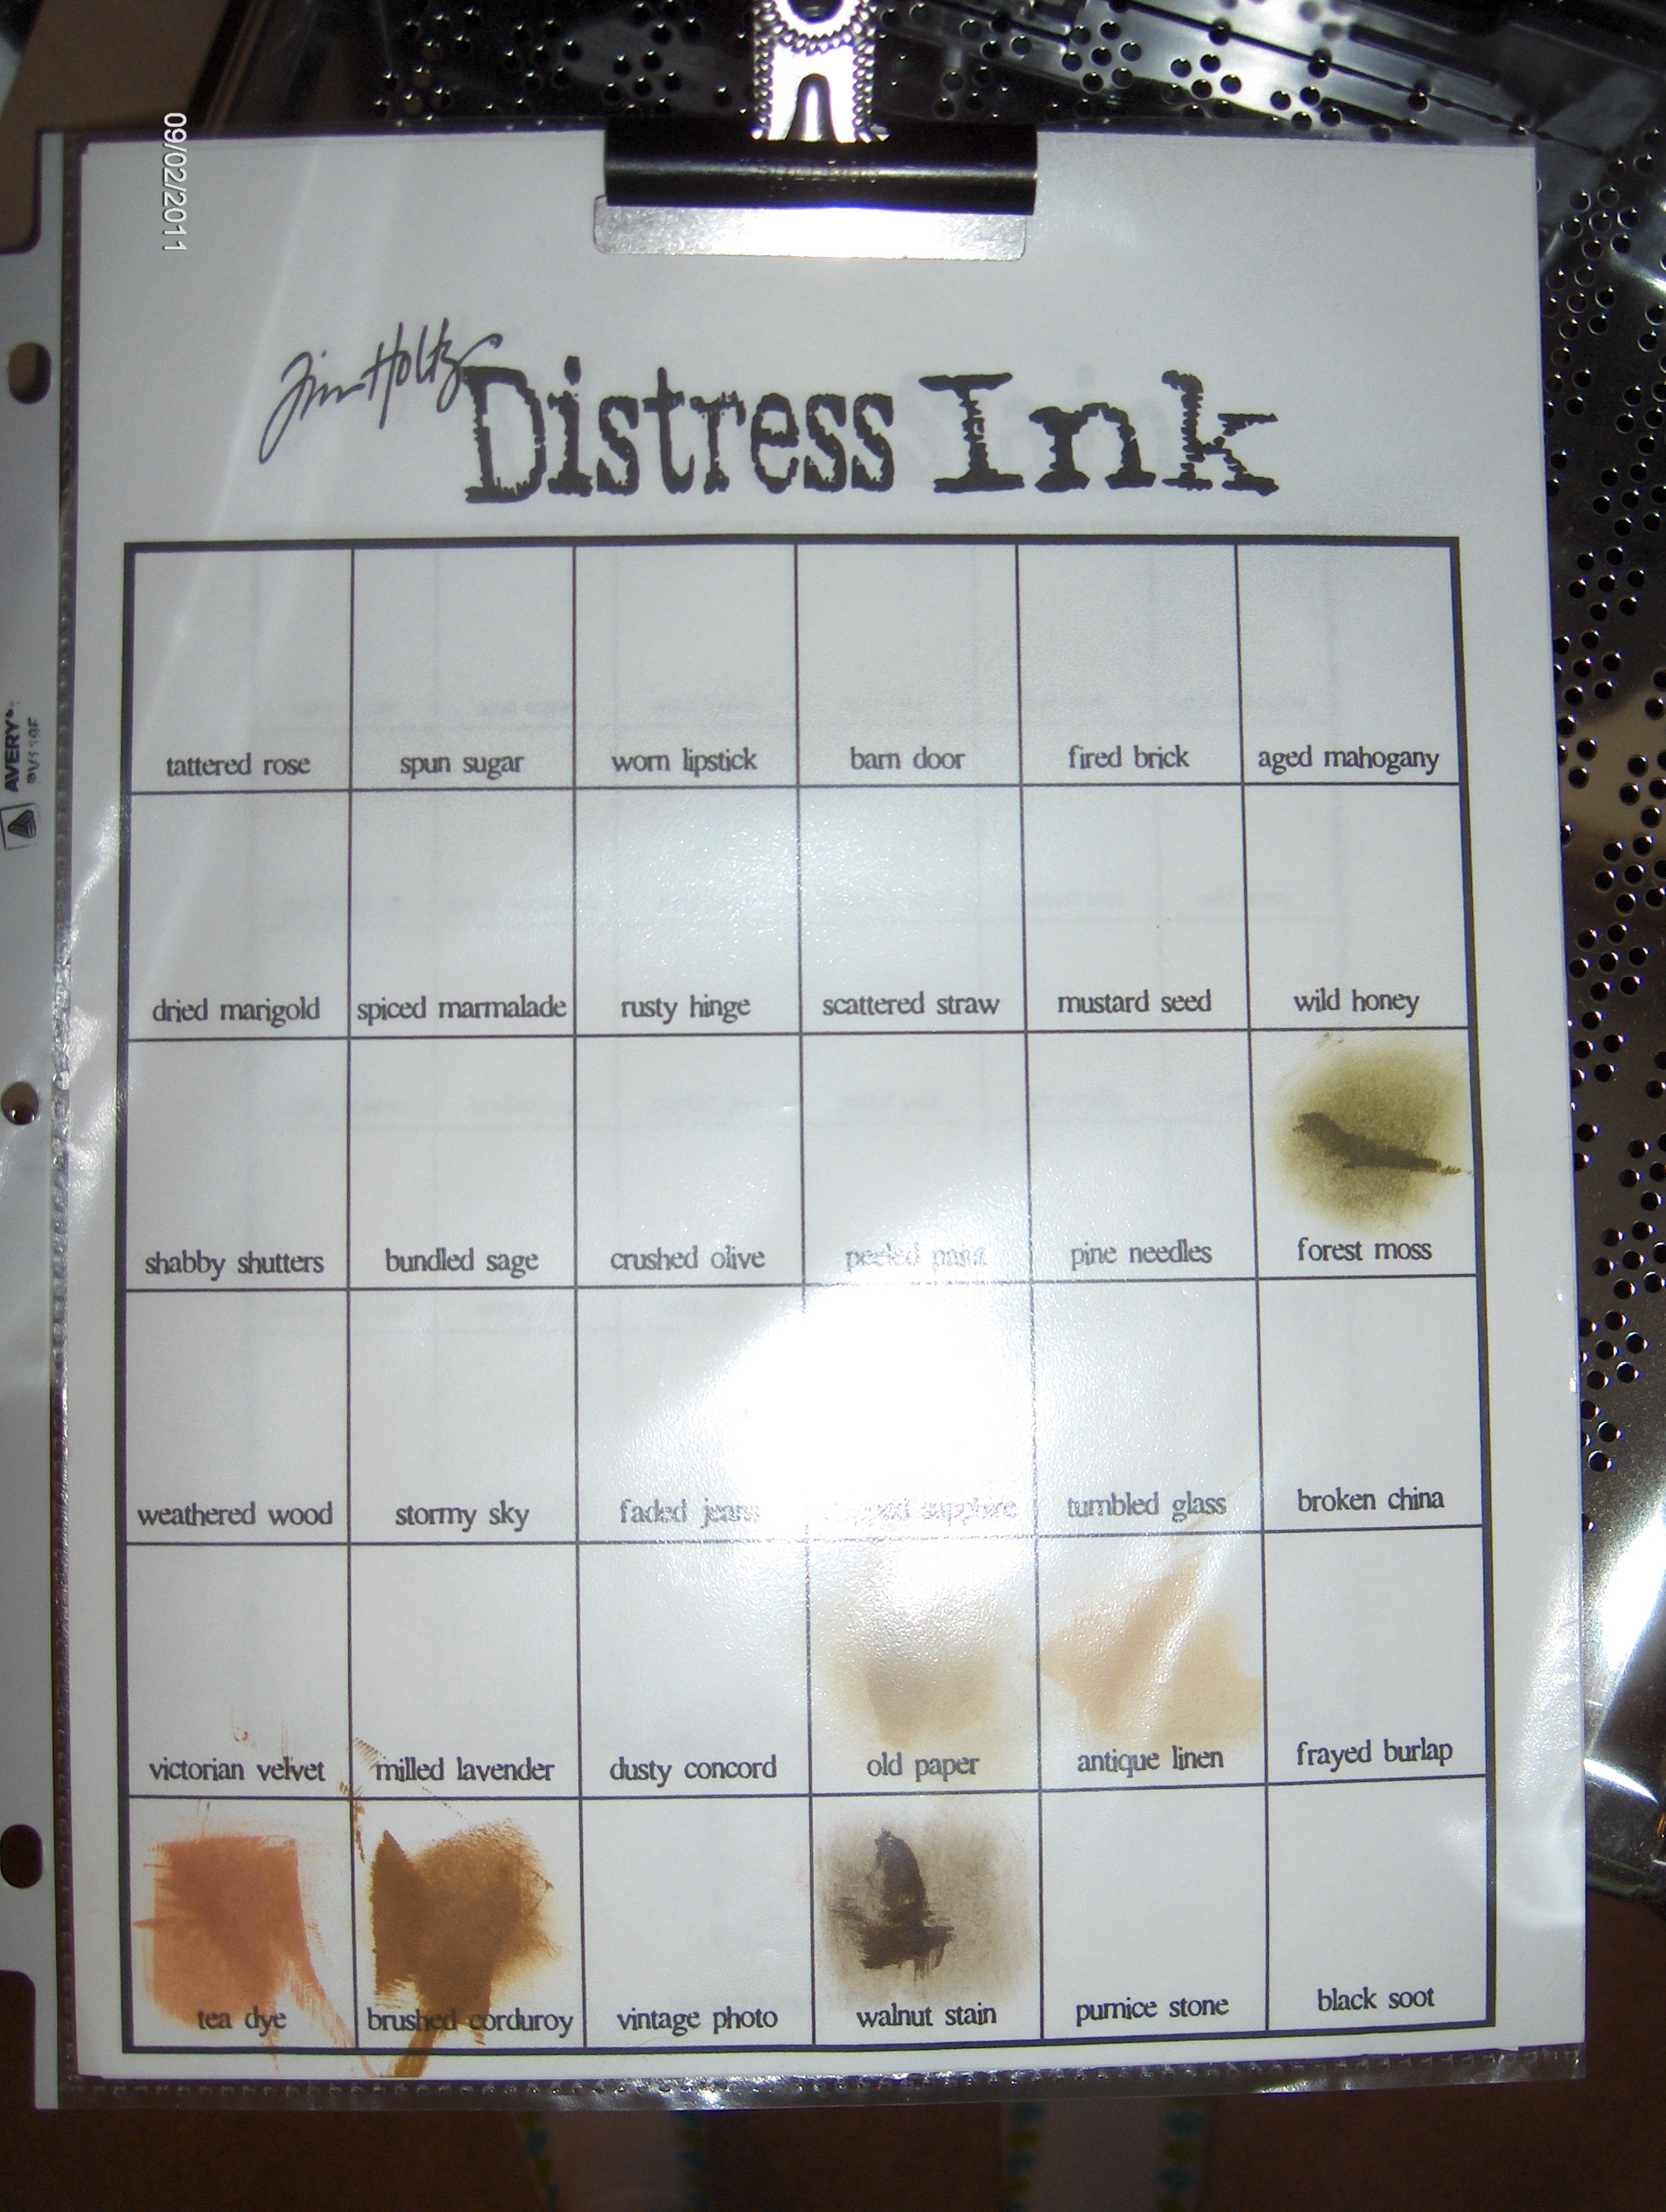 Ink Colour Chart